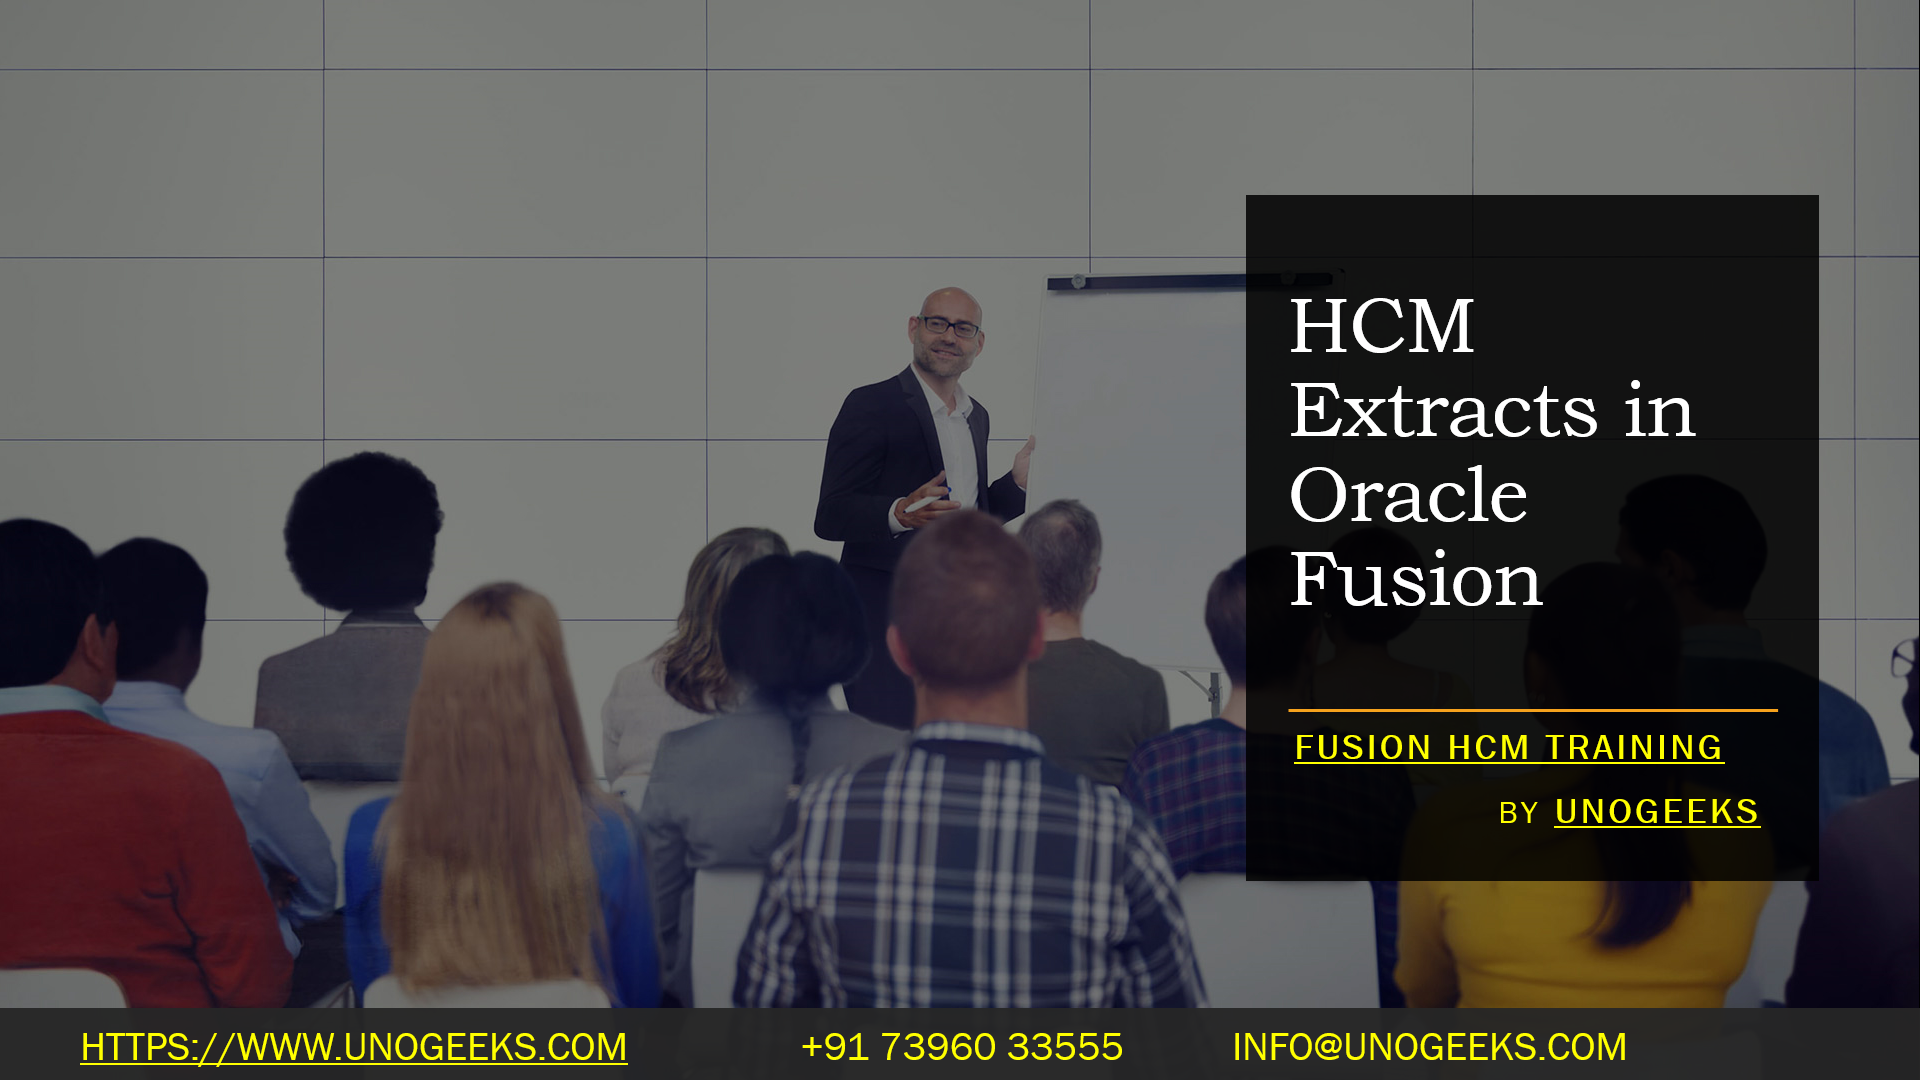 HCM Extracts in Oracle Fusion